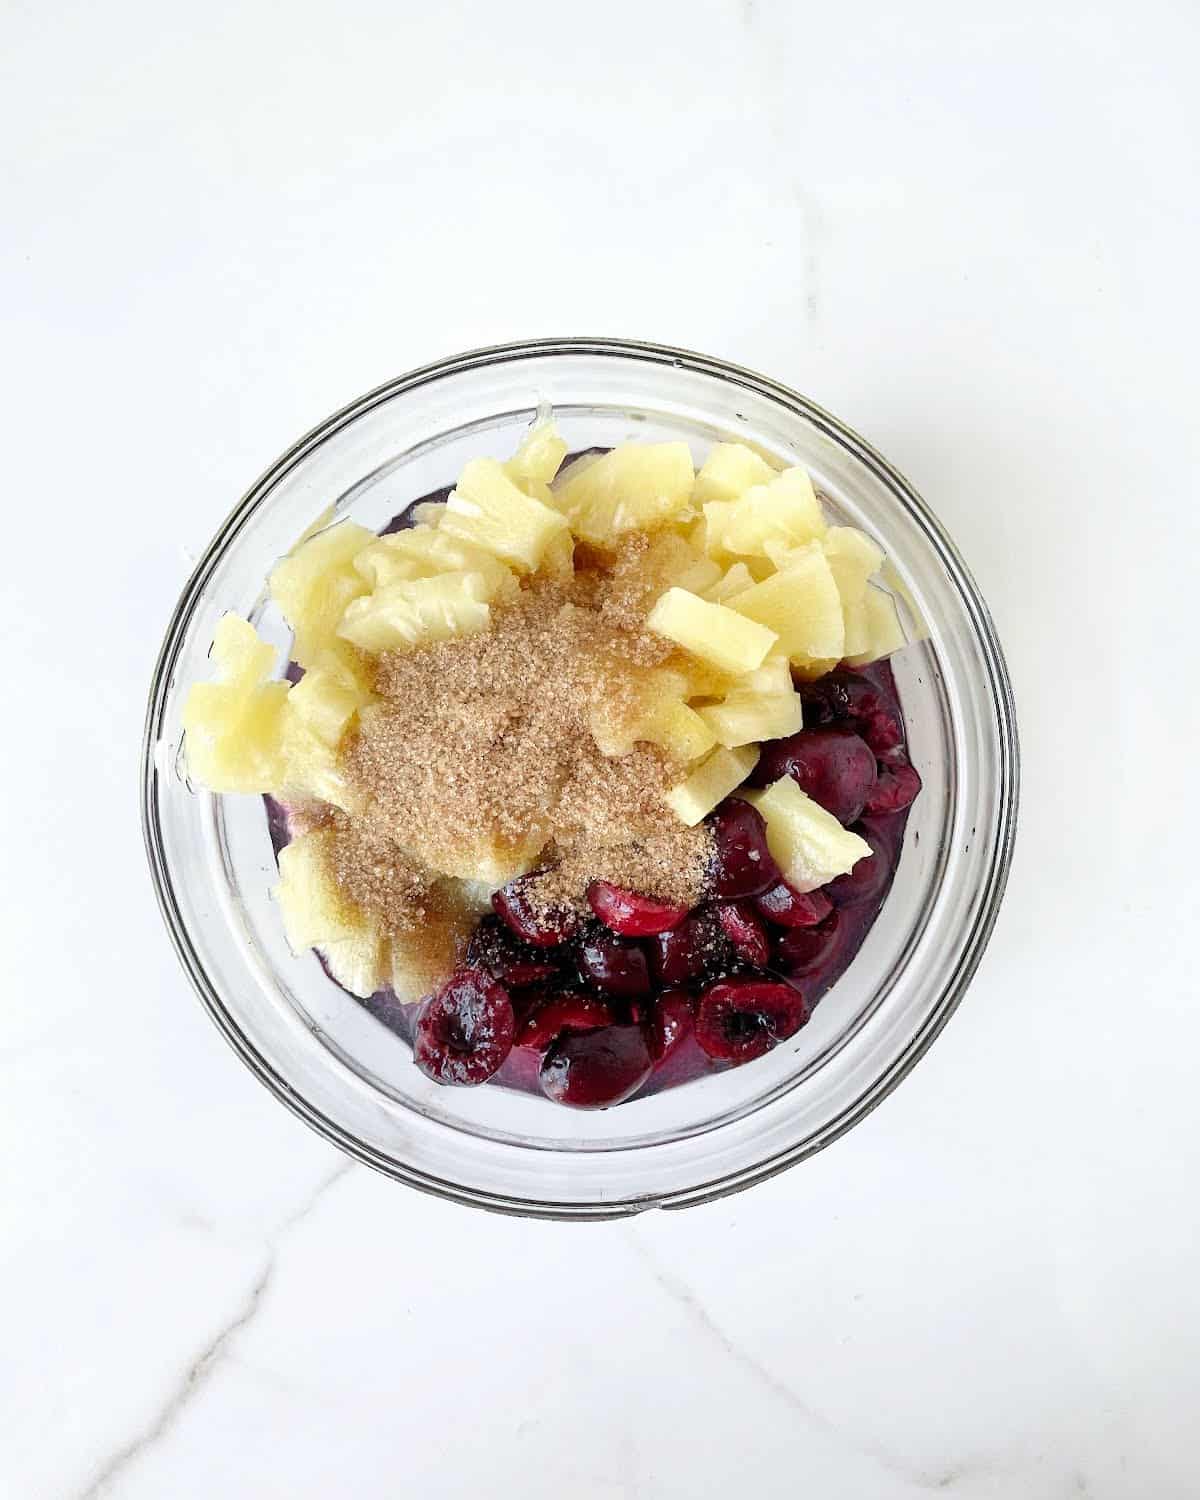 Cherries, pineapple chunks, brown sugar, and lemon juice in a glass bowl on a white marble surface.